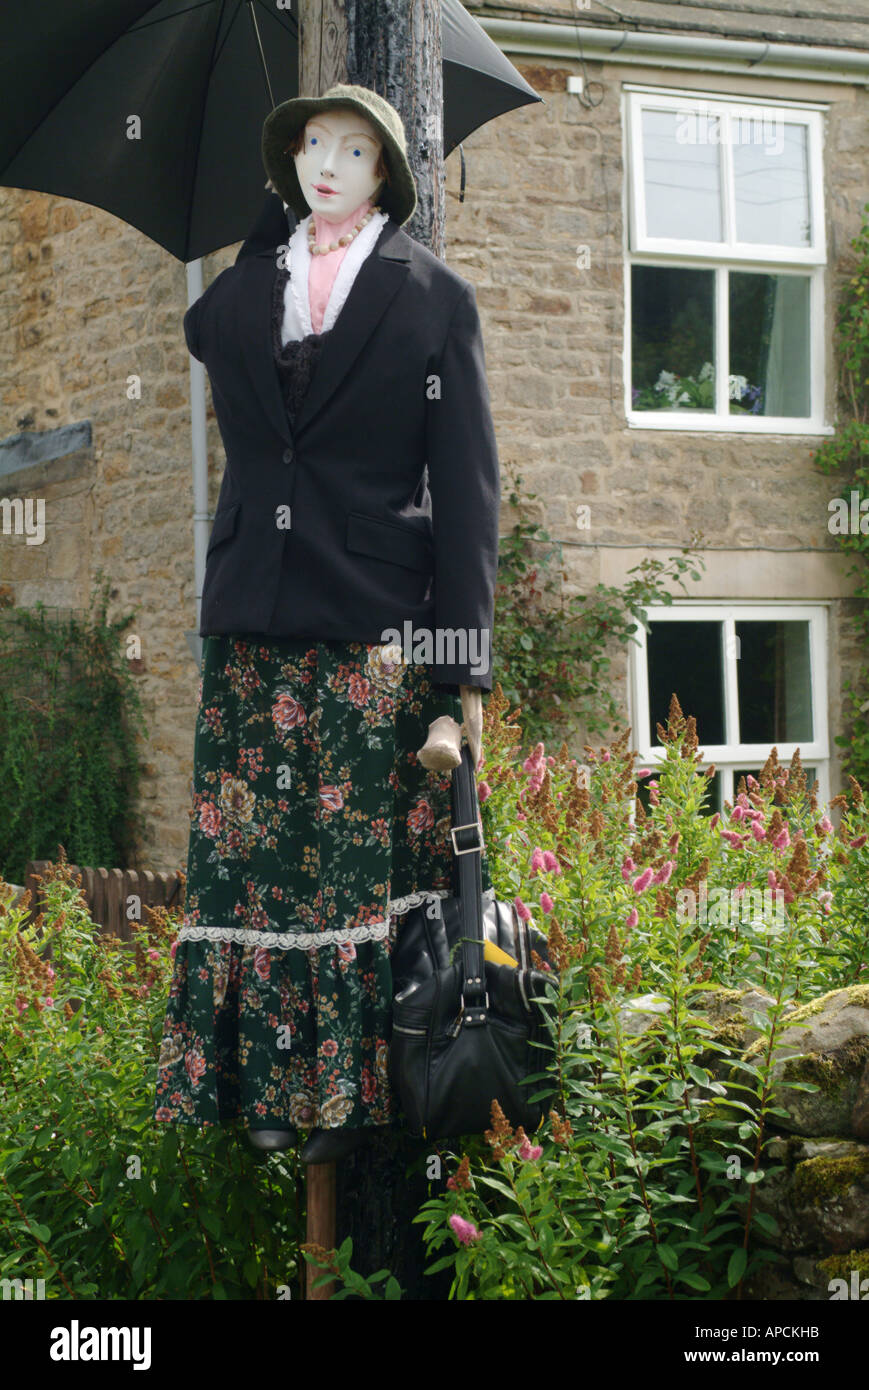 Mary Poppins in the Scarecrow Trail at Romaldkirk Fair, County Durham, England, UK. Stock Photo